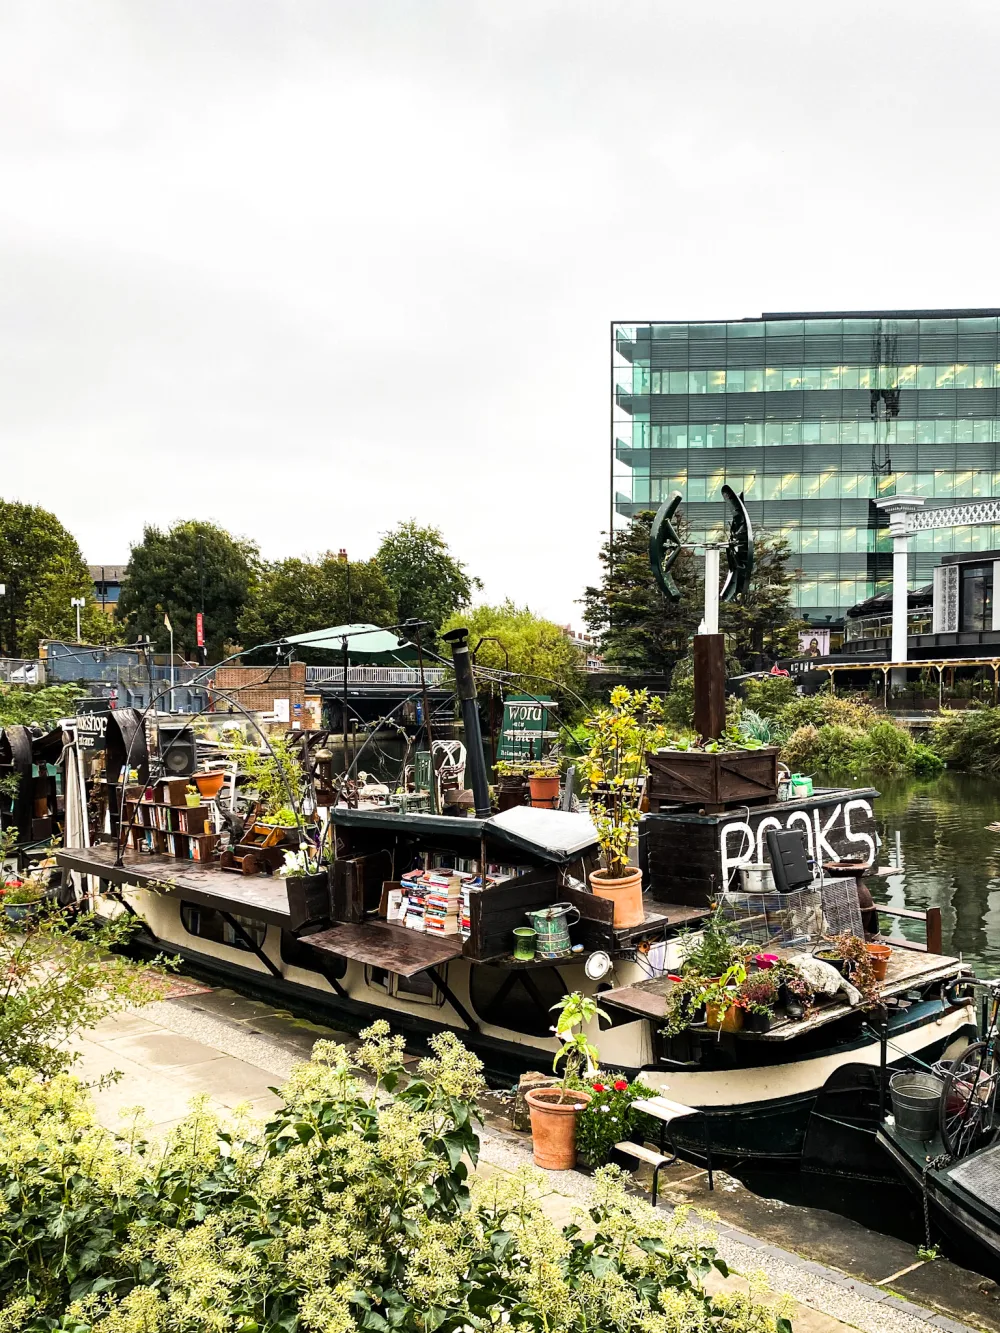 Word on the Water, floating bookshop on Regent's Canal